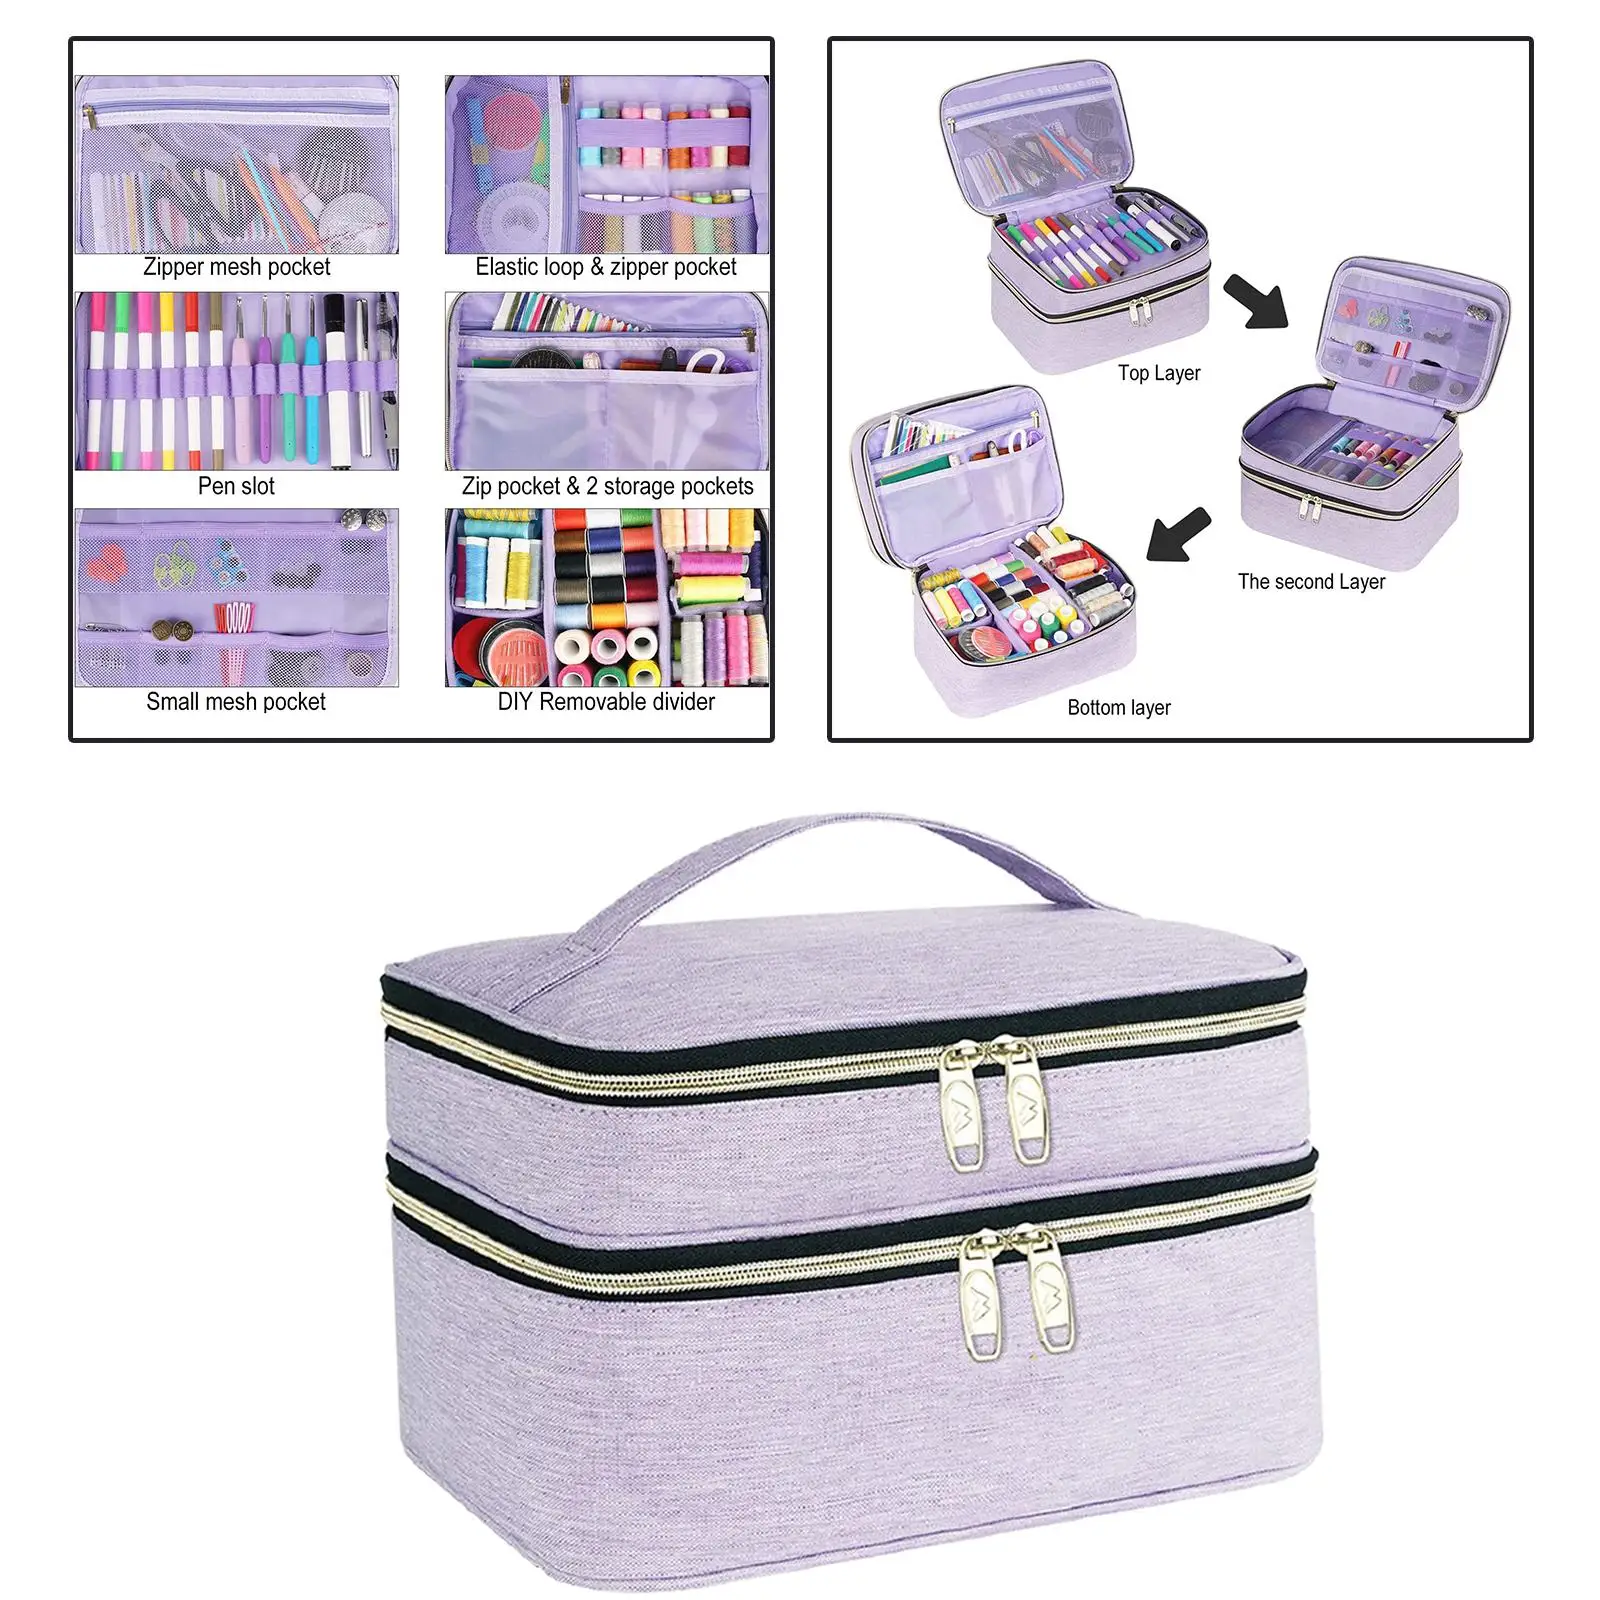 Sewing Supplies Organizer Double Layer Polyester Portable Water Resistant Case for Sewing Tools  Measuring Tape Buttons